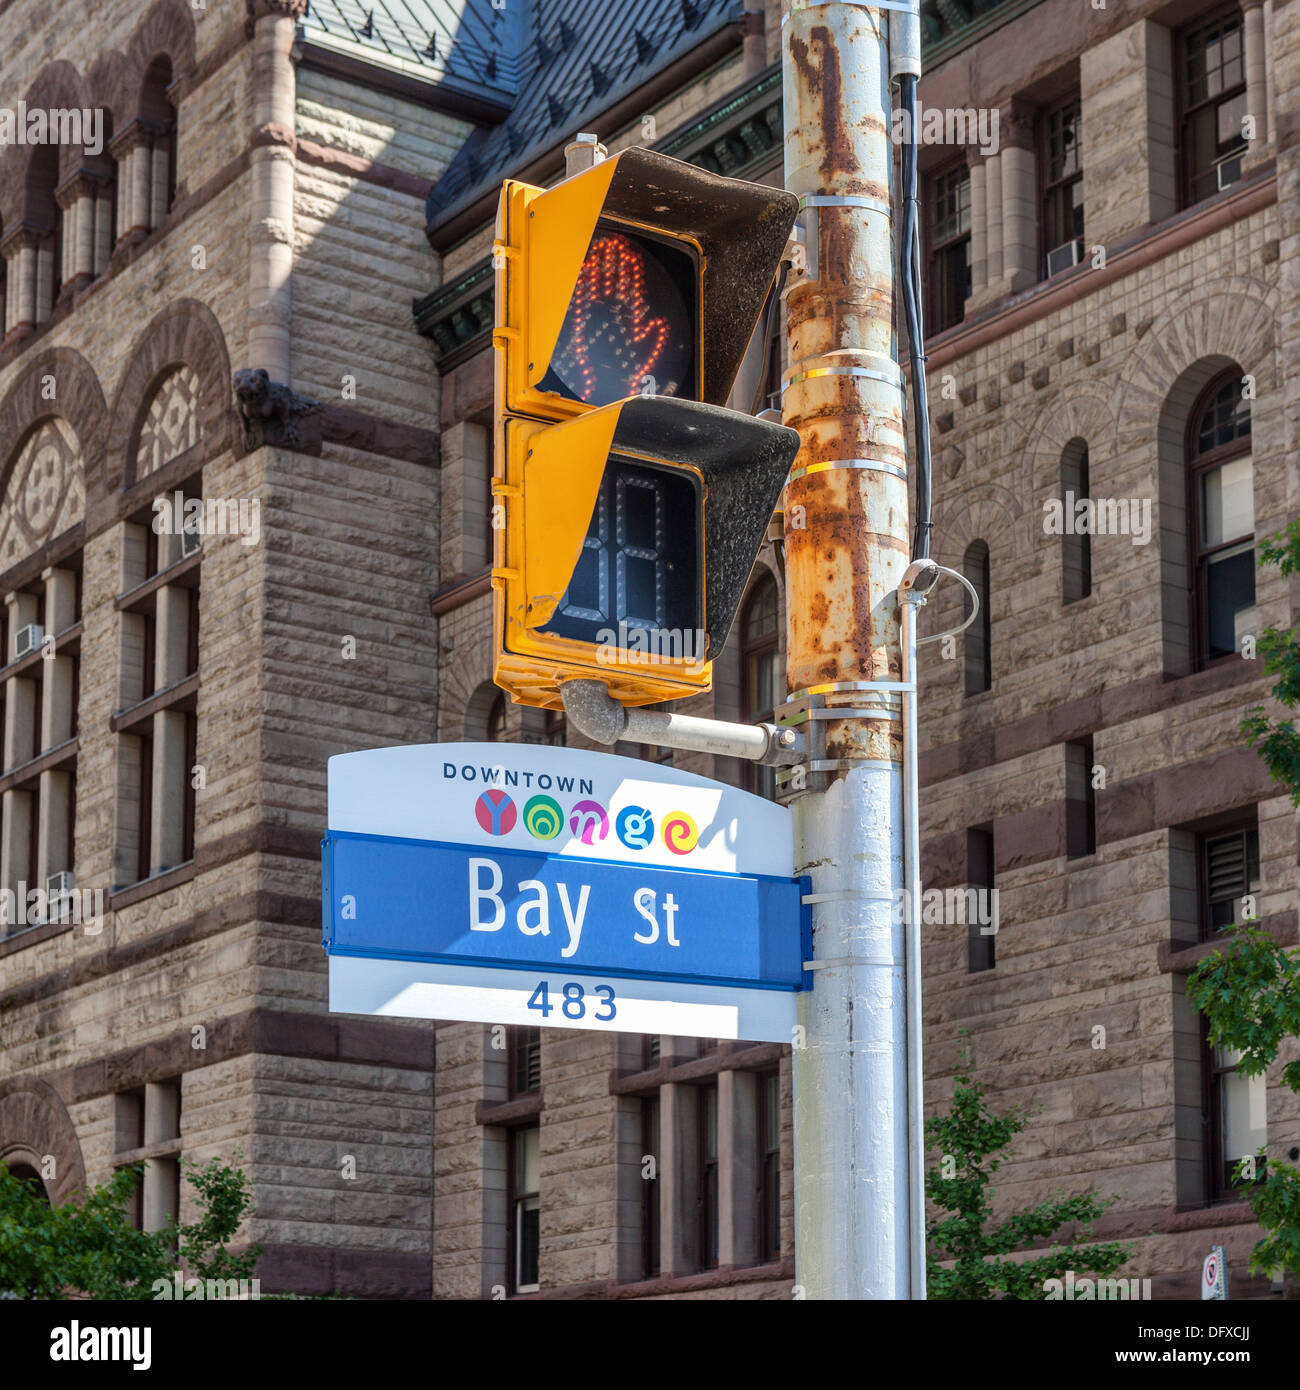 Downtown Yonge, Bay Street sign and yellow pedestrian crossing light with sand stone old city hall in background, Toronto Stock Photo